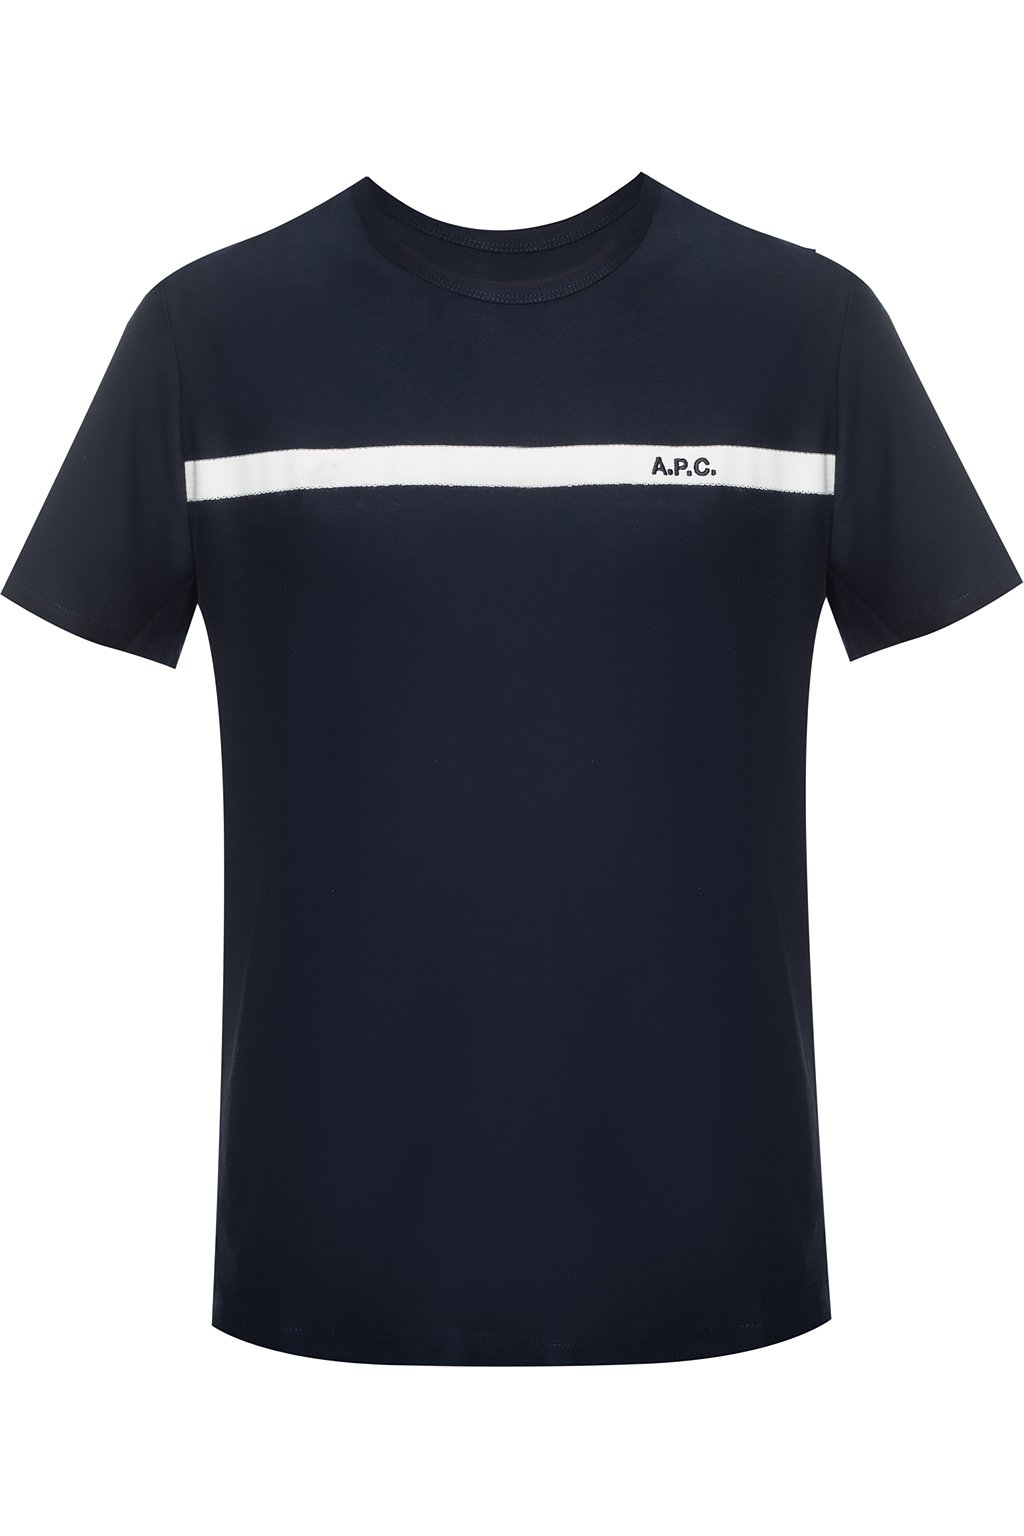 Men's Clothing - A.P.C. T | Logo Embroidery Striped T-Shirt 